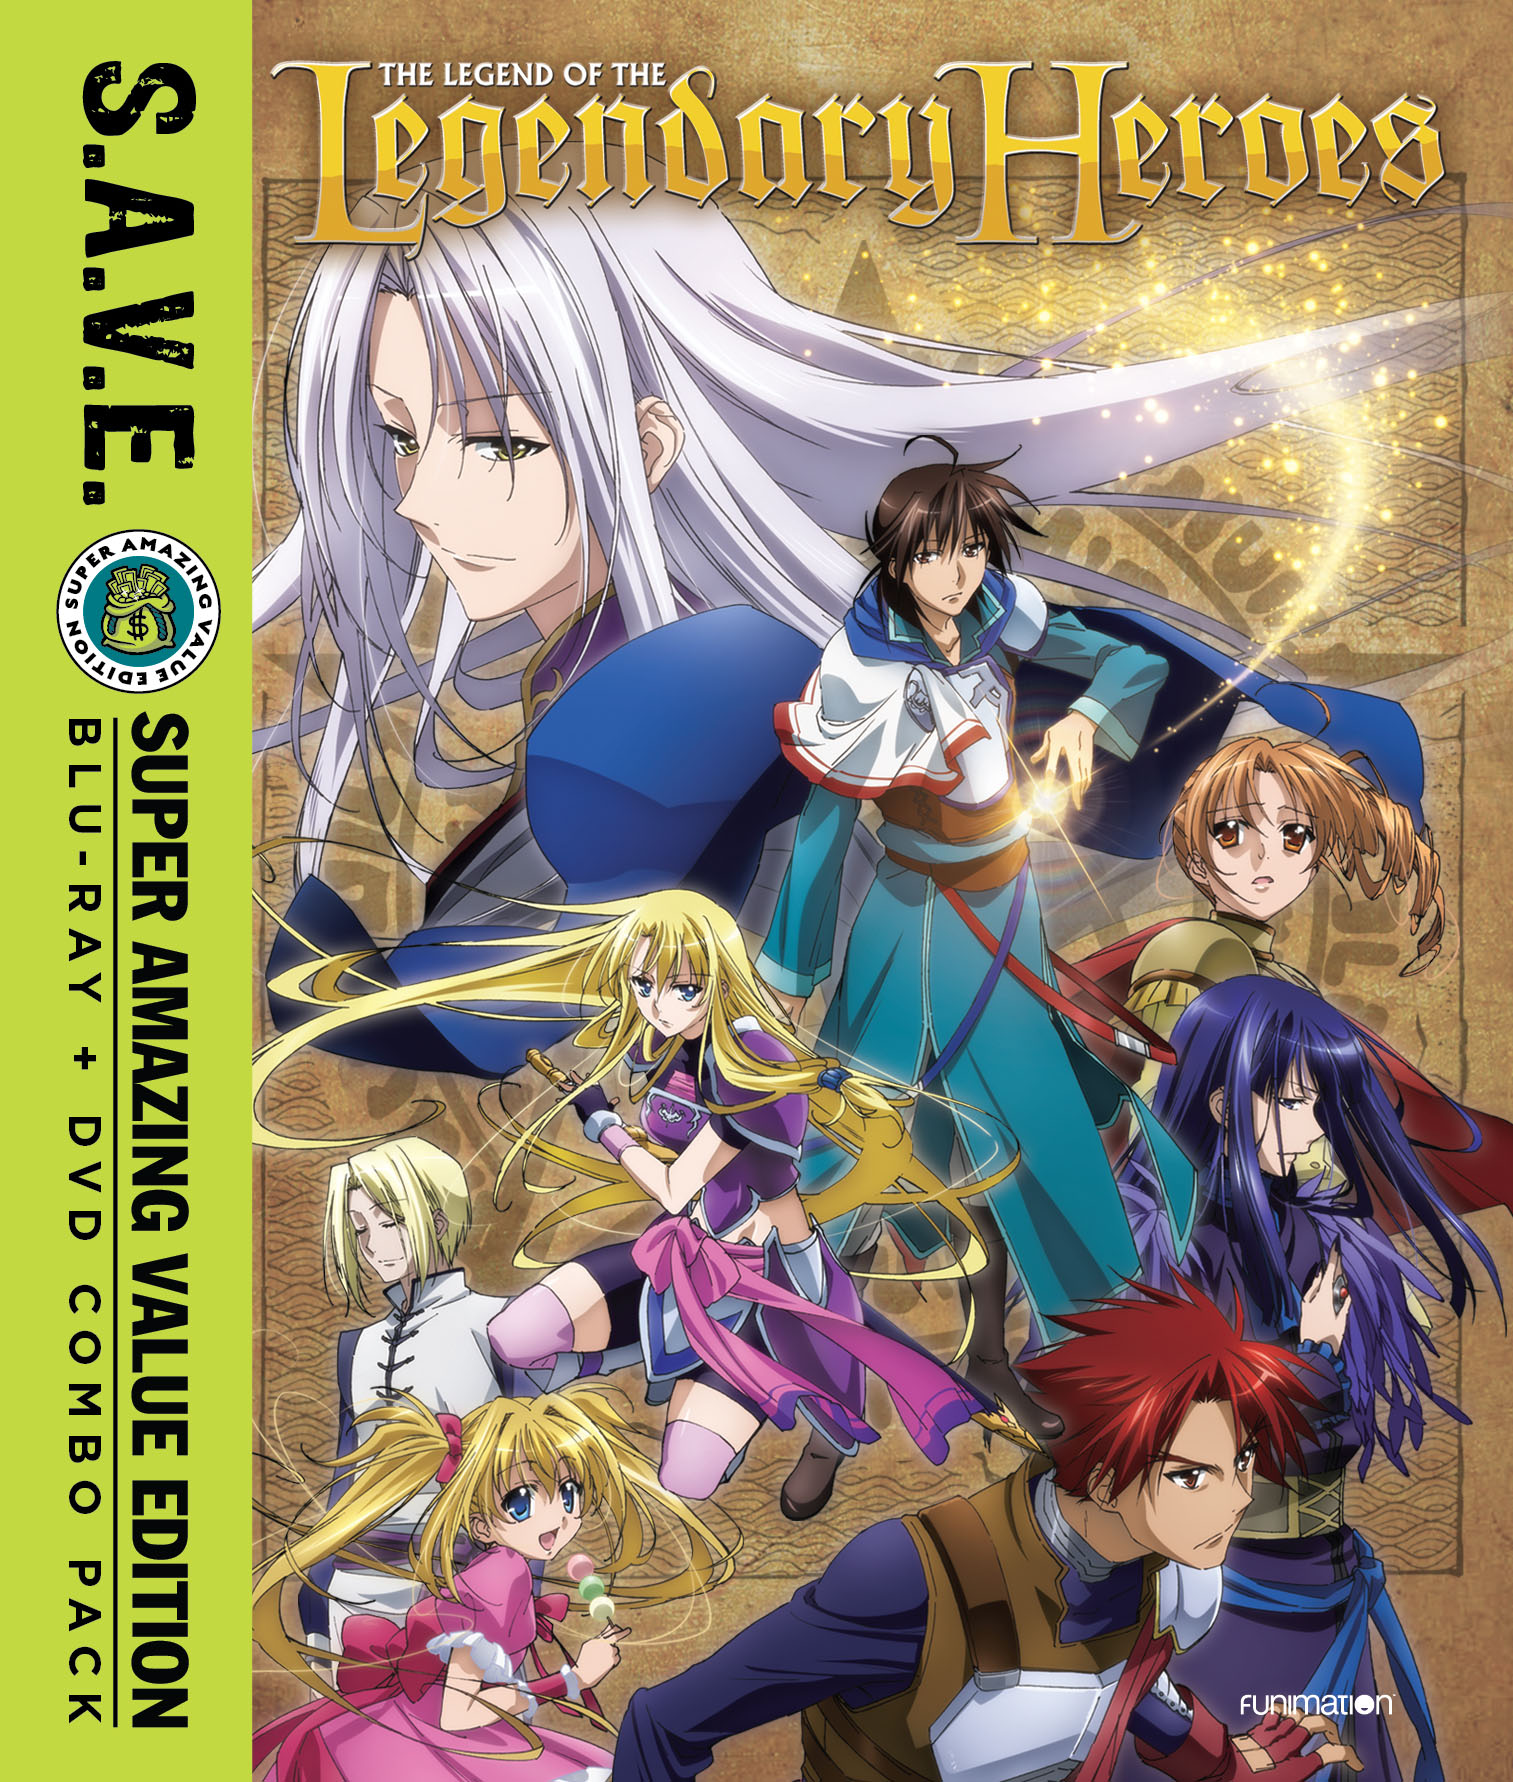 The Legend of the Legendary Heroes: The Complete Series [.E.]  [Blu-ray] [8 Discs] - Best Buy